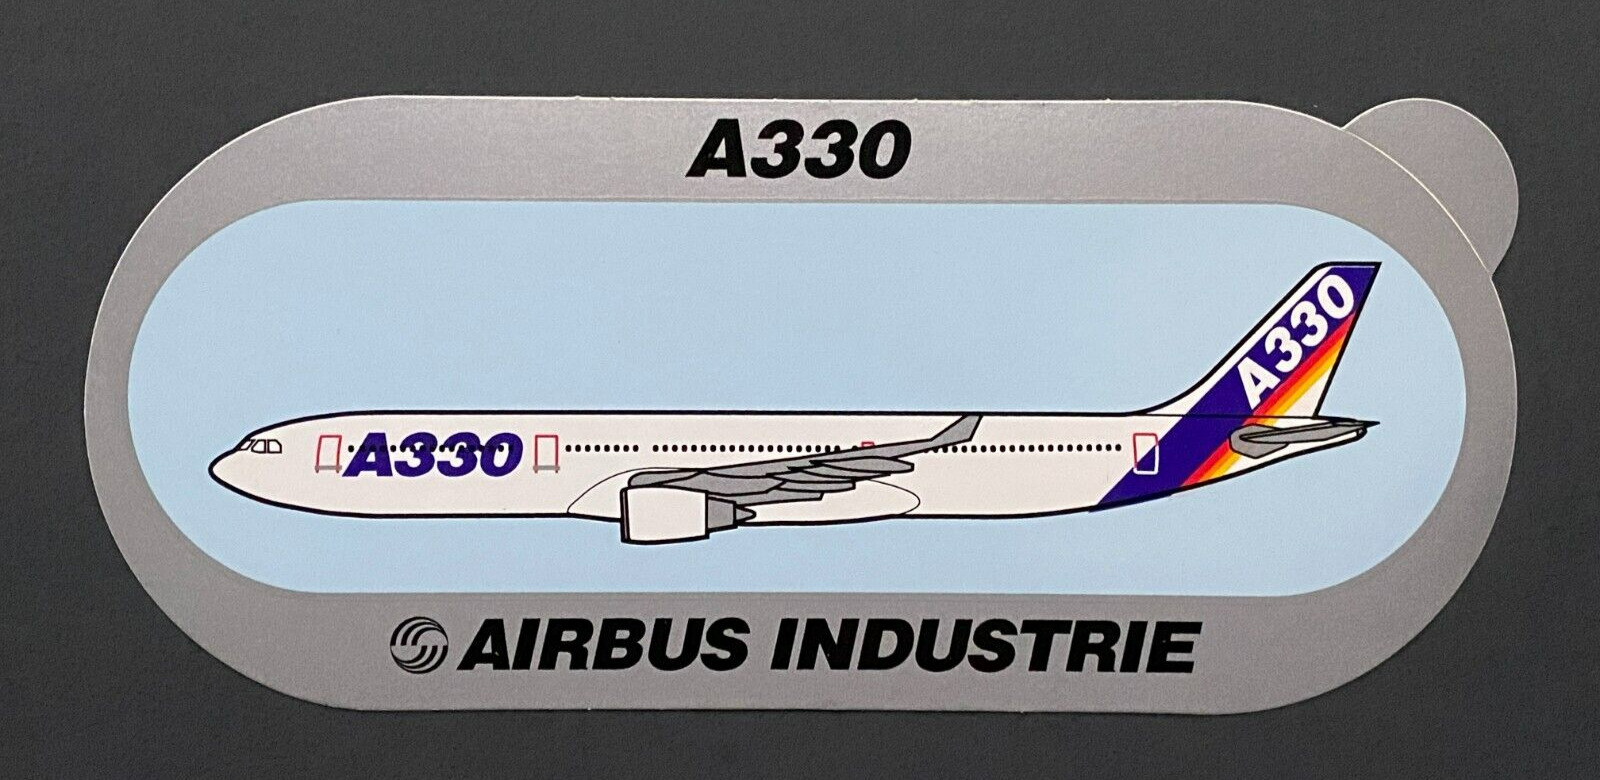 Airbus Industrie A330 Aircraft Sticker - Version 1